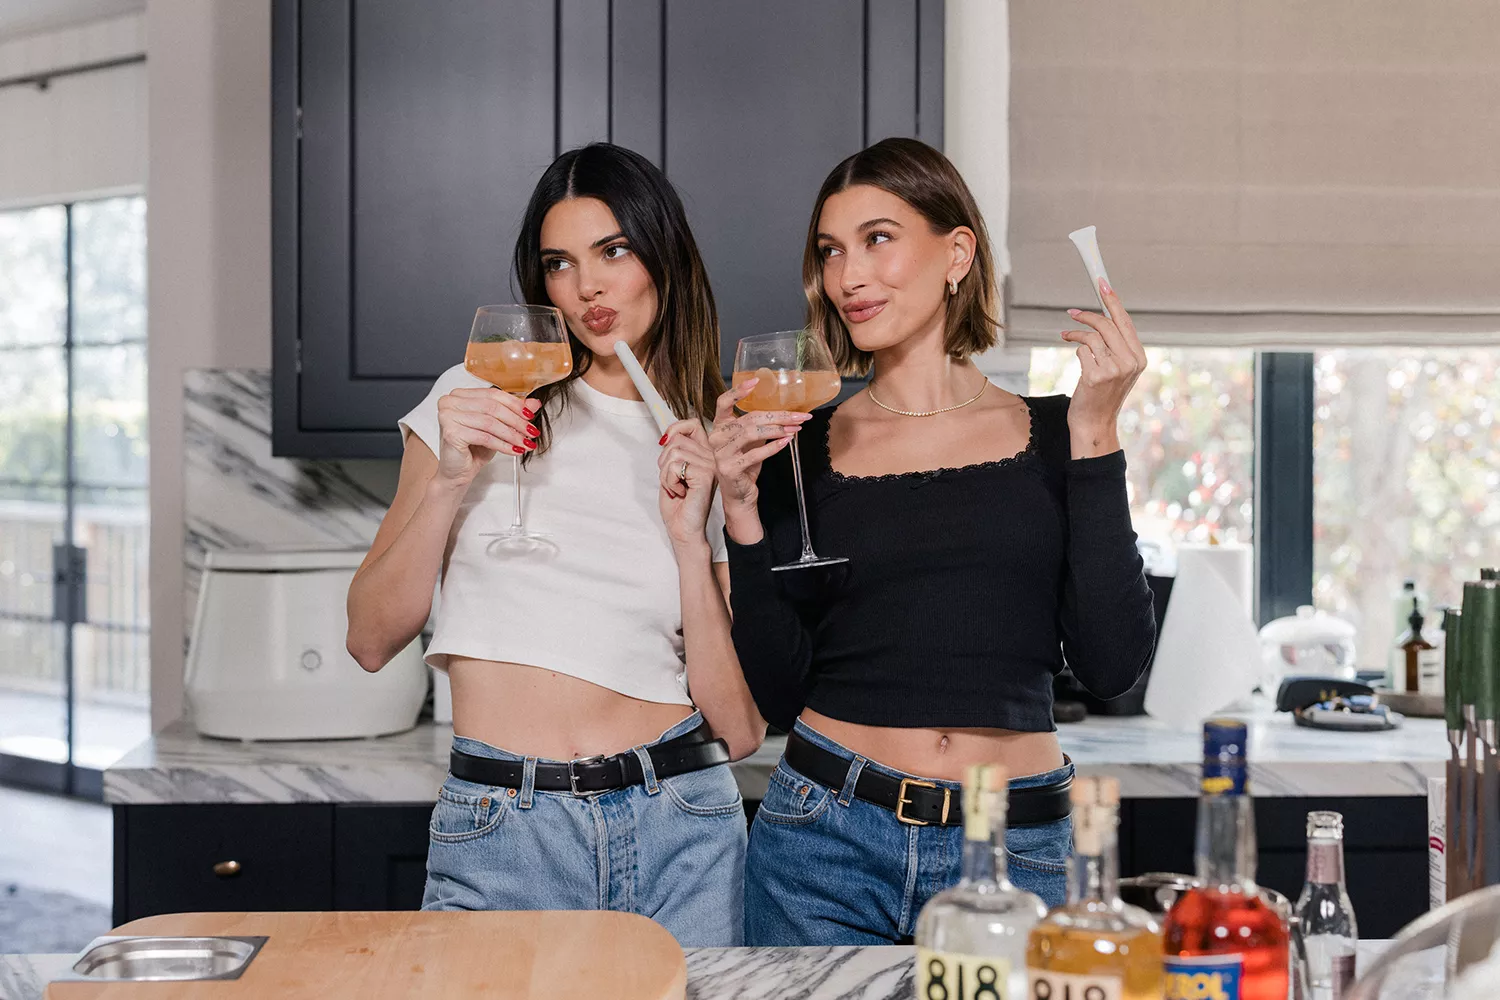 Kendall Jenner and Hailey Bieber Share Kris Jenner's 'Famous' Dip That Is 'So Popular' with Their Friends 14